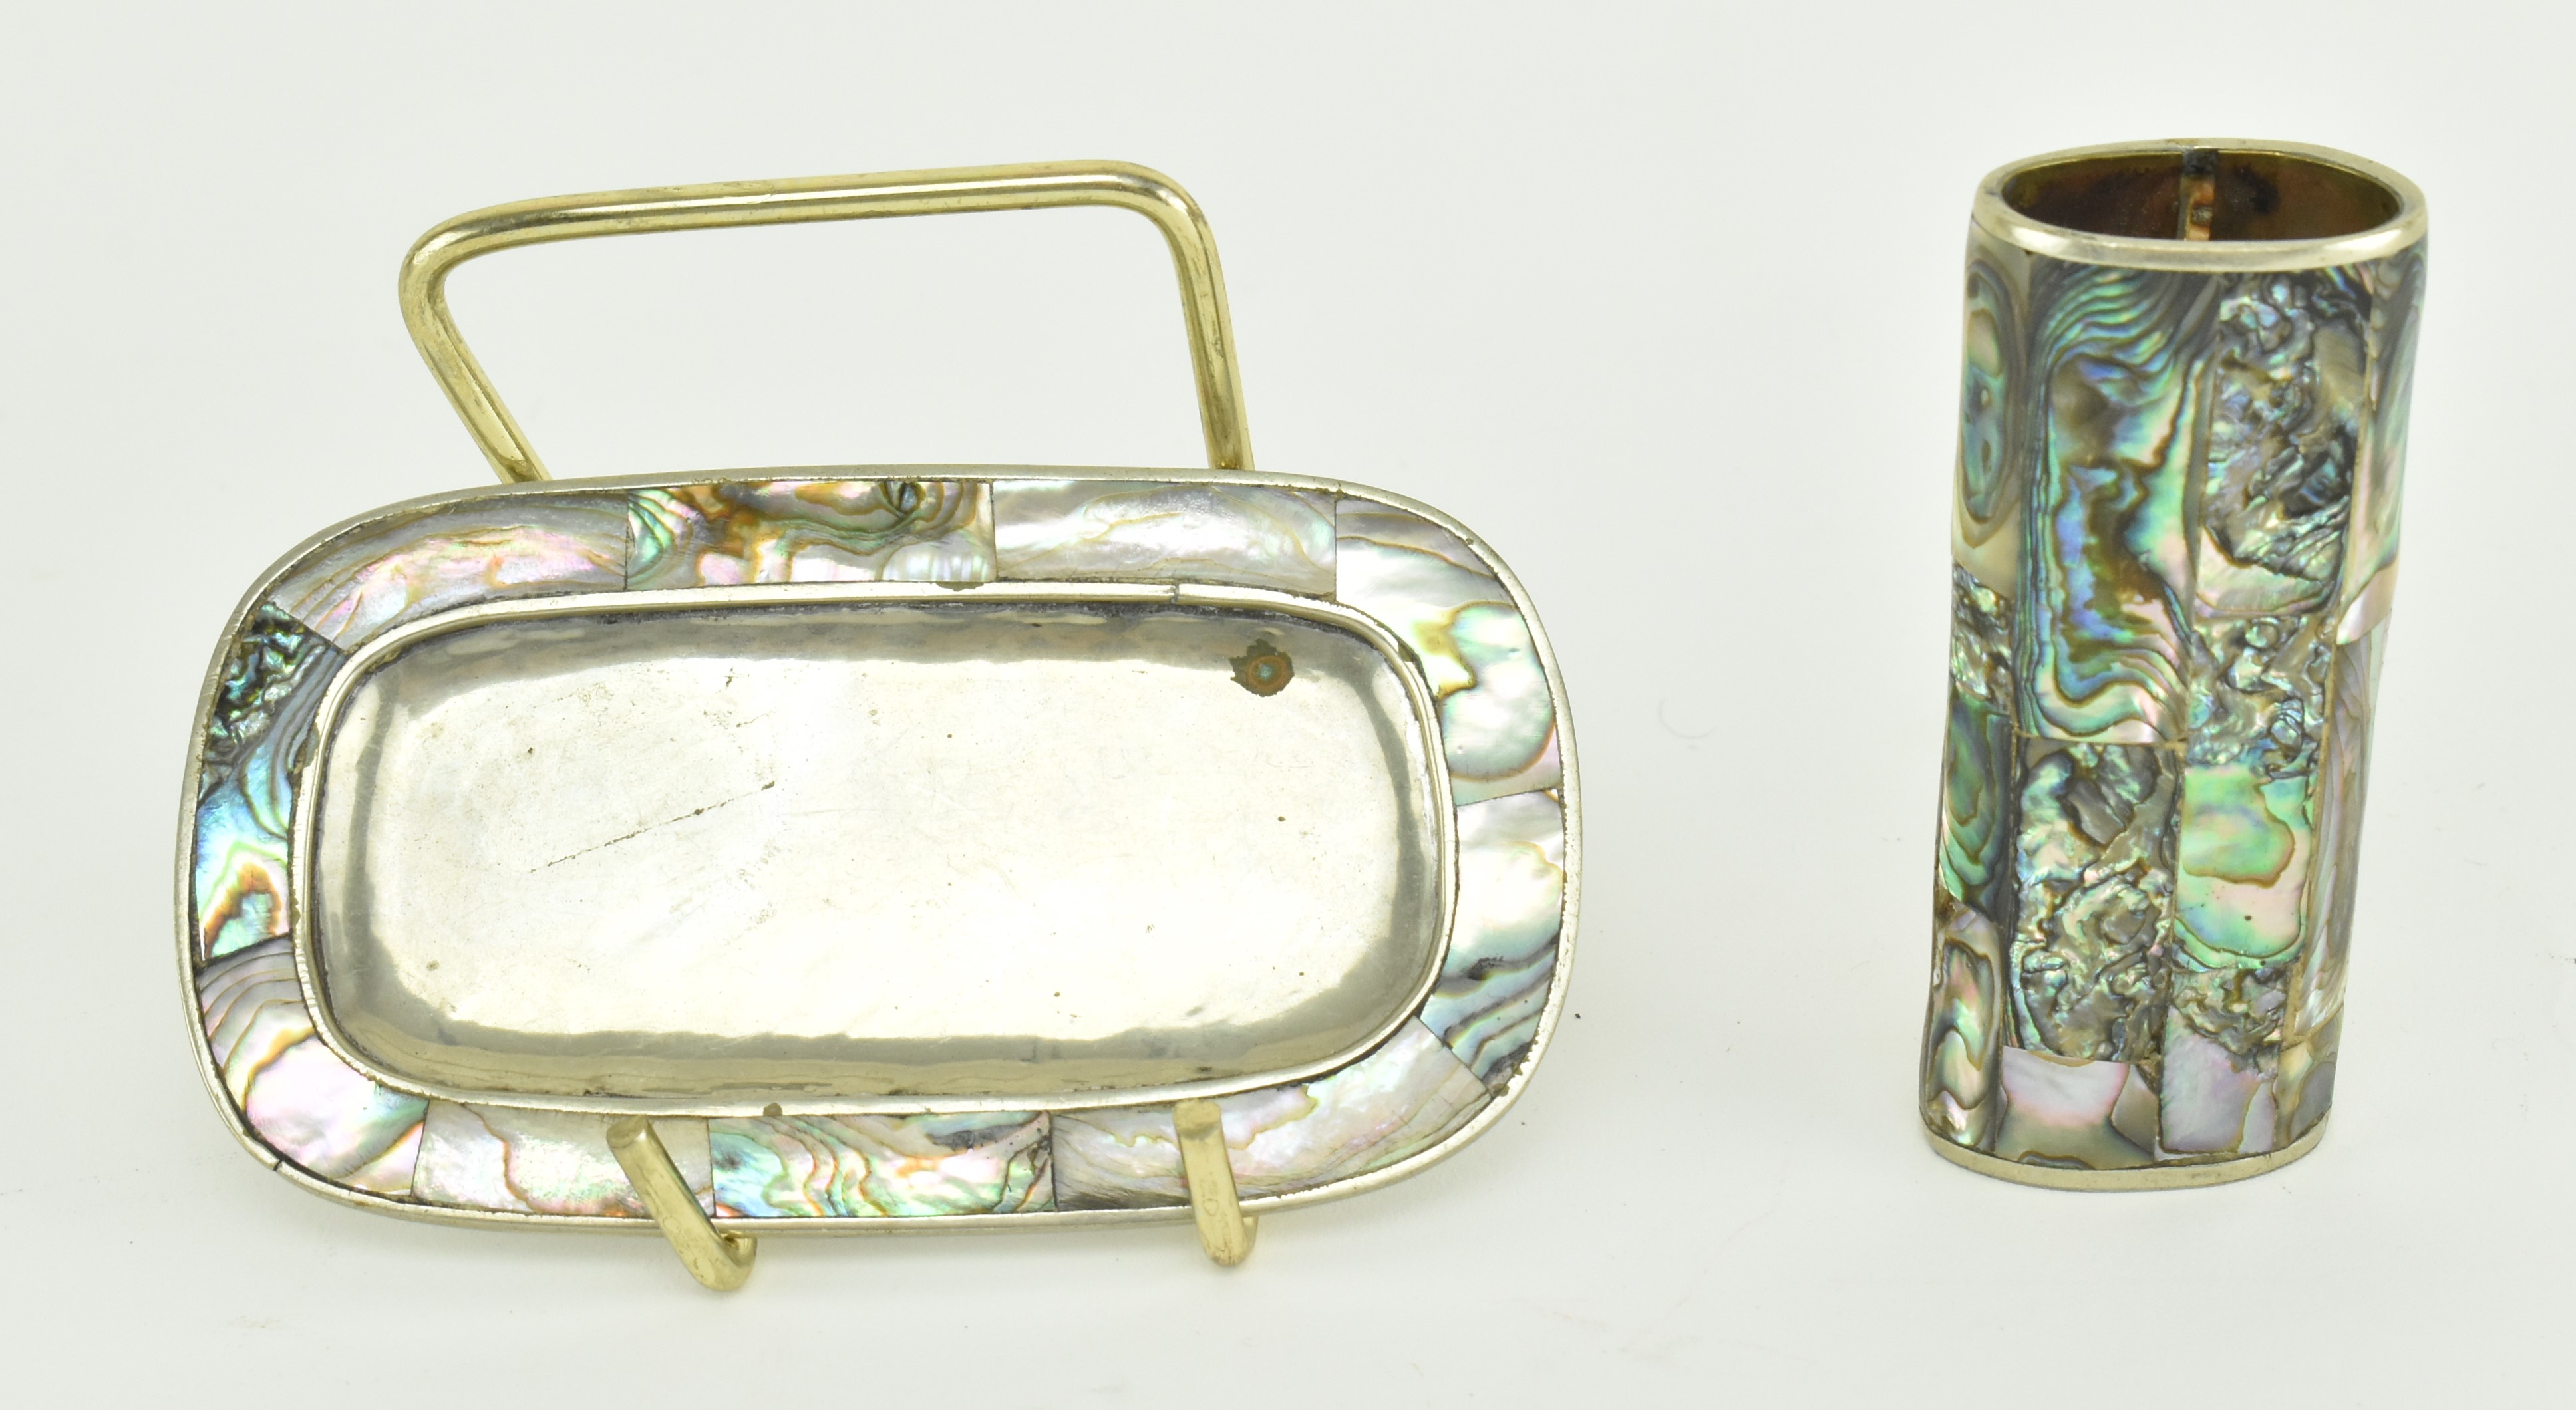 COLLECTION OF VINTAGE ABALONE ITEMS, INCL. SALT & PEPPER SHAKERS - Image 2 of 12